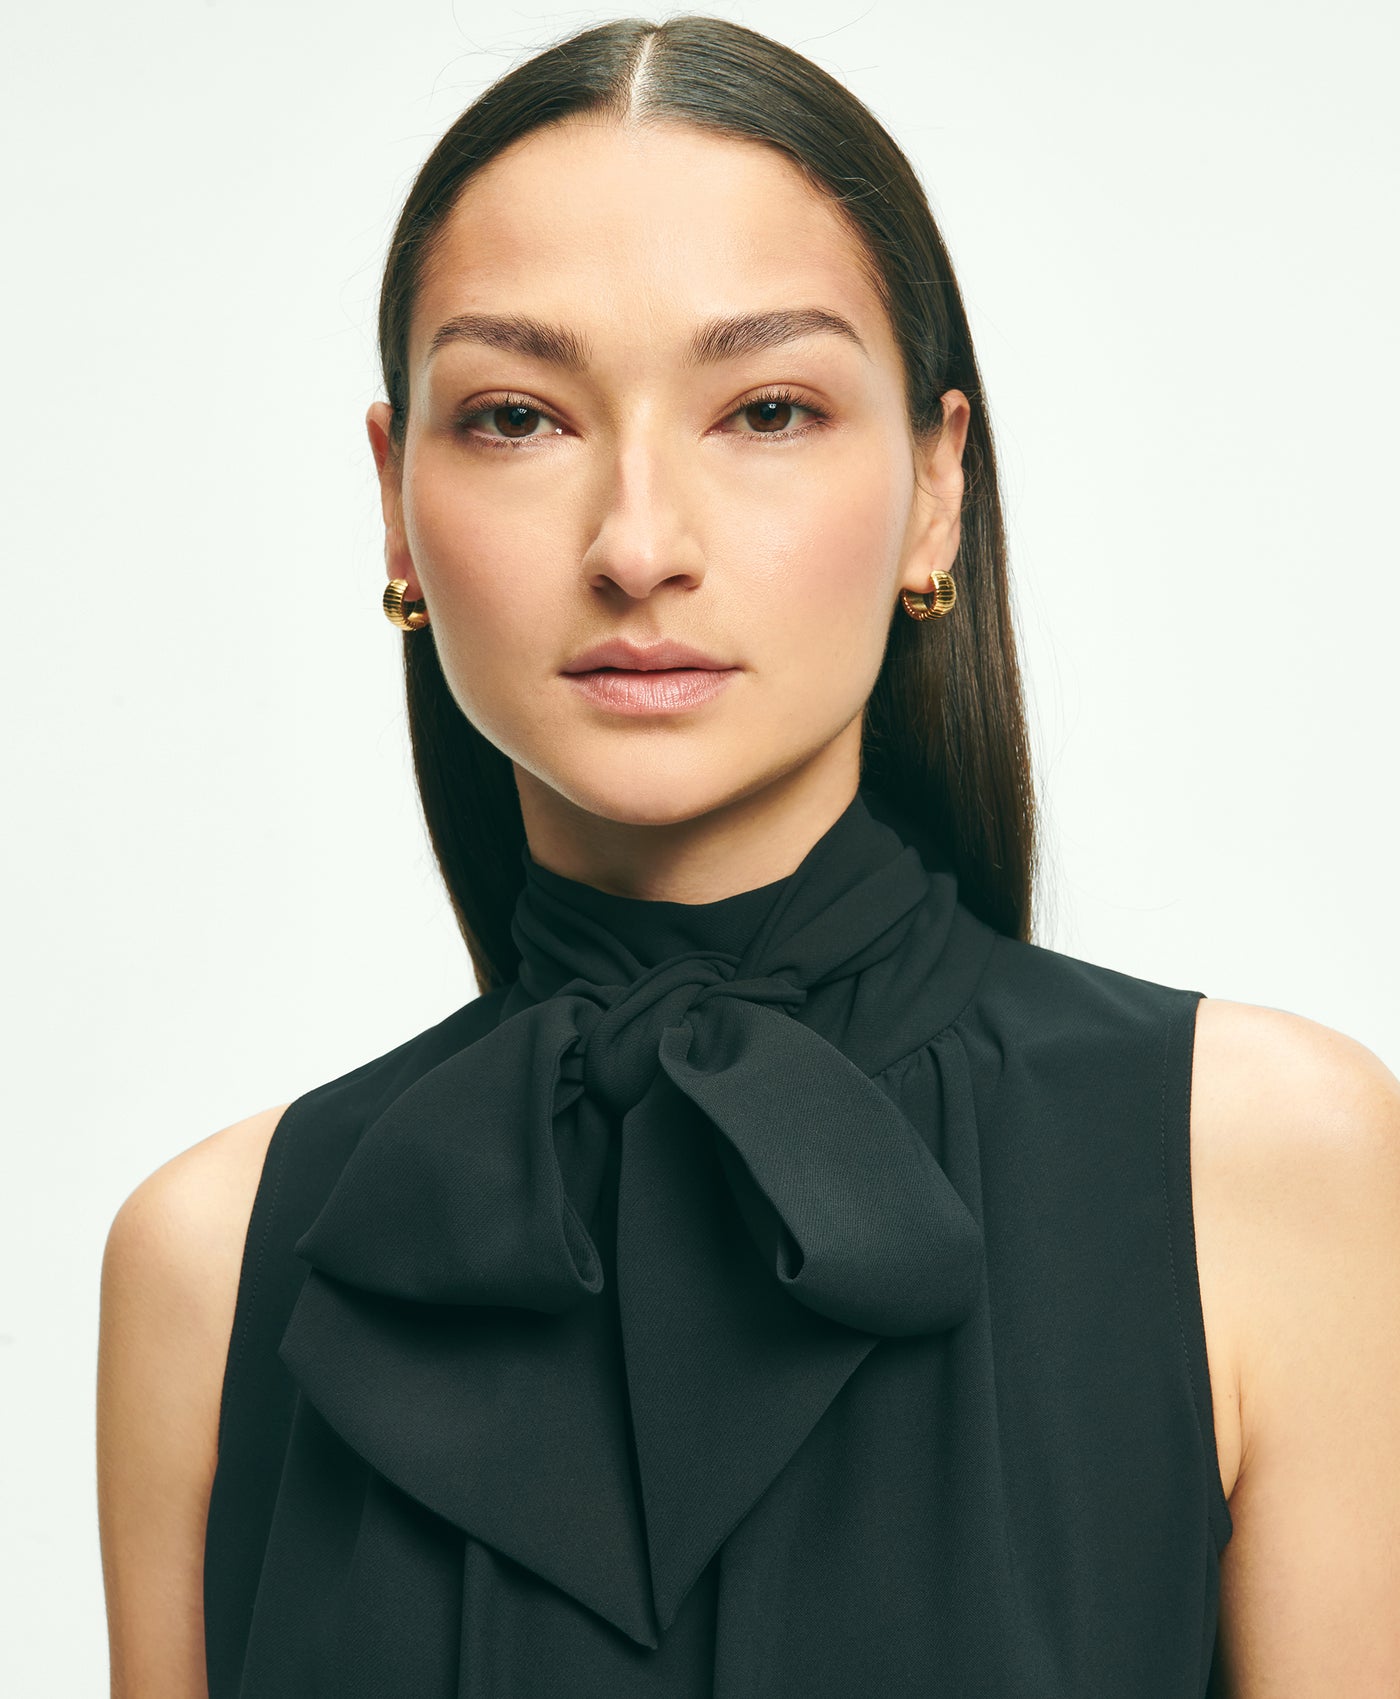 Crepe Bow Neck Jumpsuit - Brooks Brothers Canada